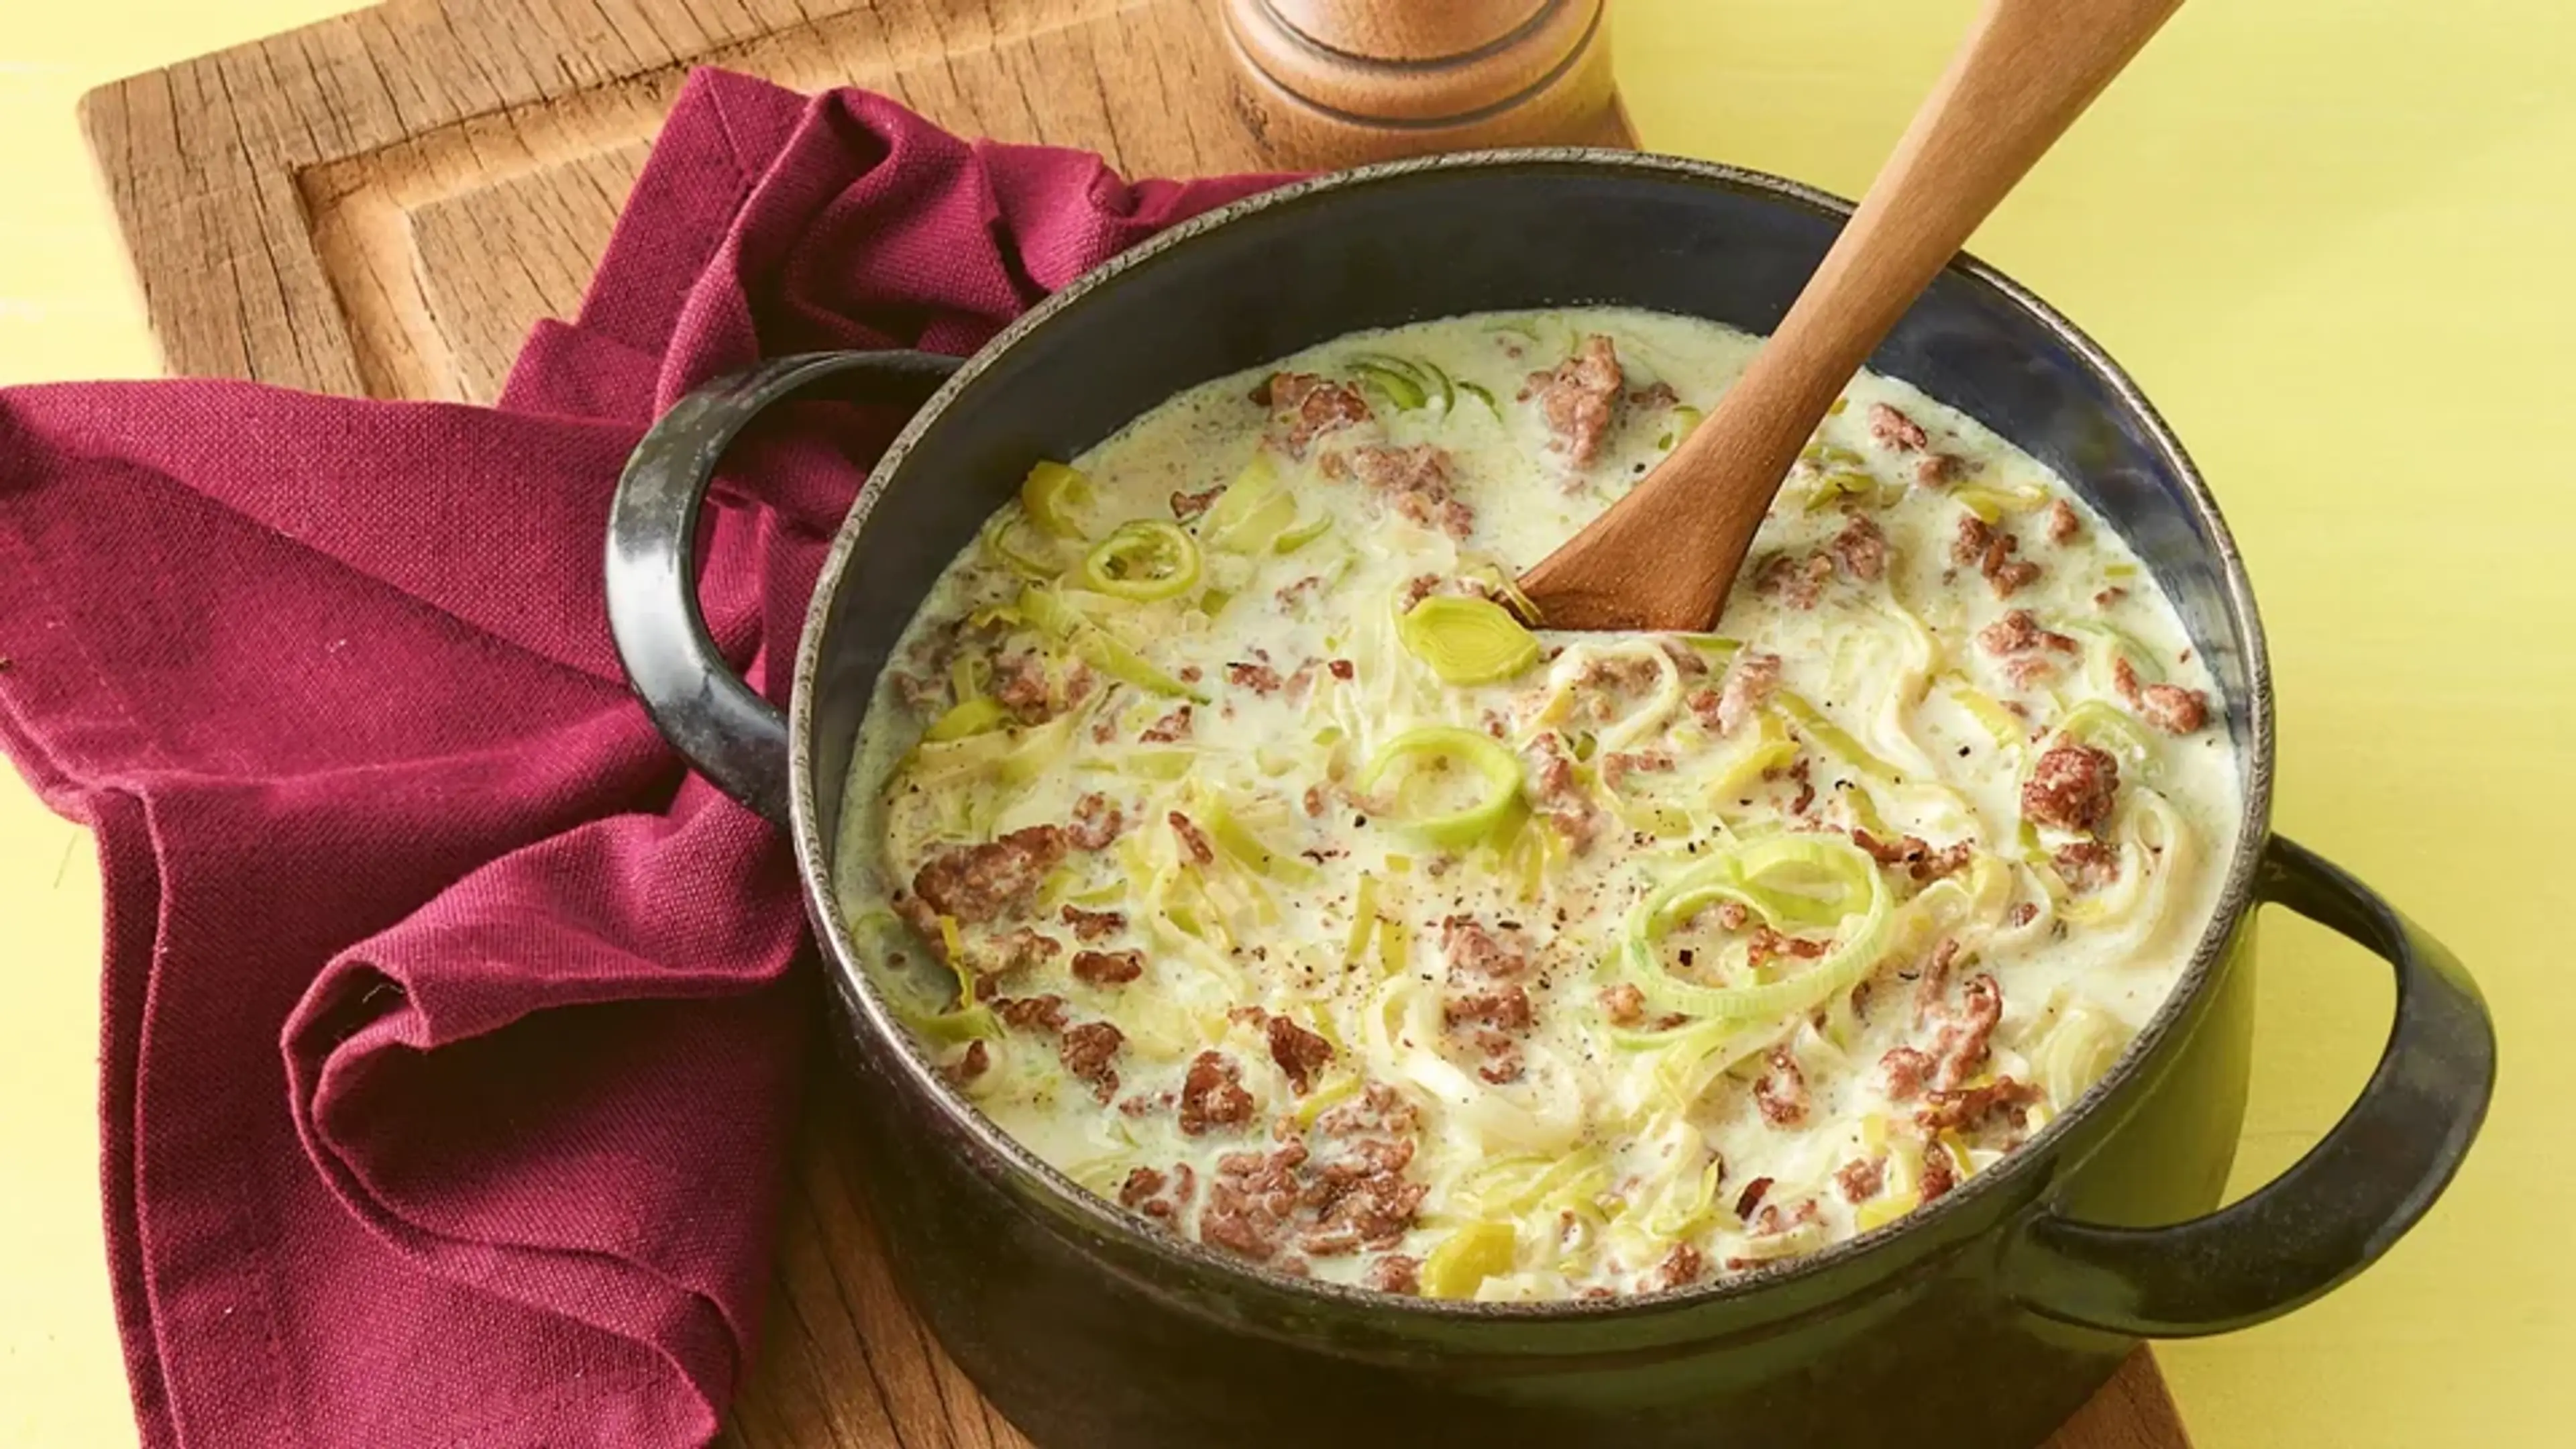 German Cheese-Leek Soup with Minced Meat